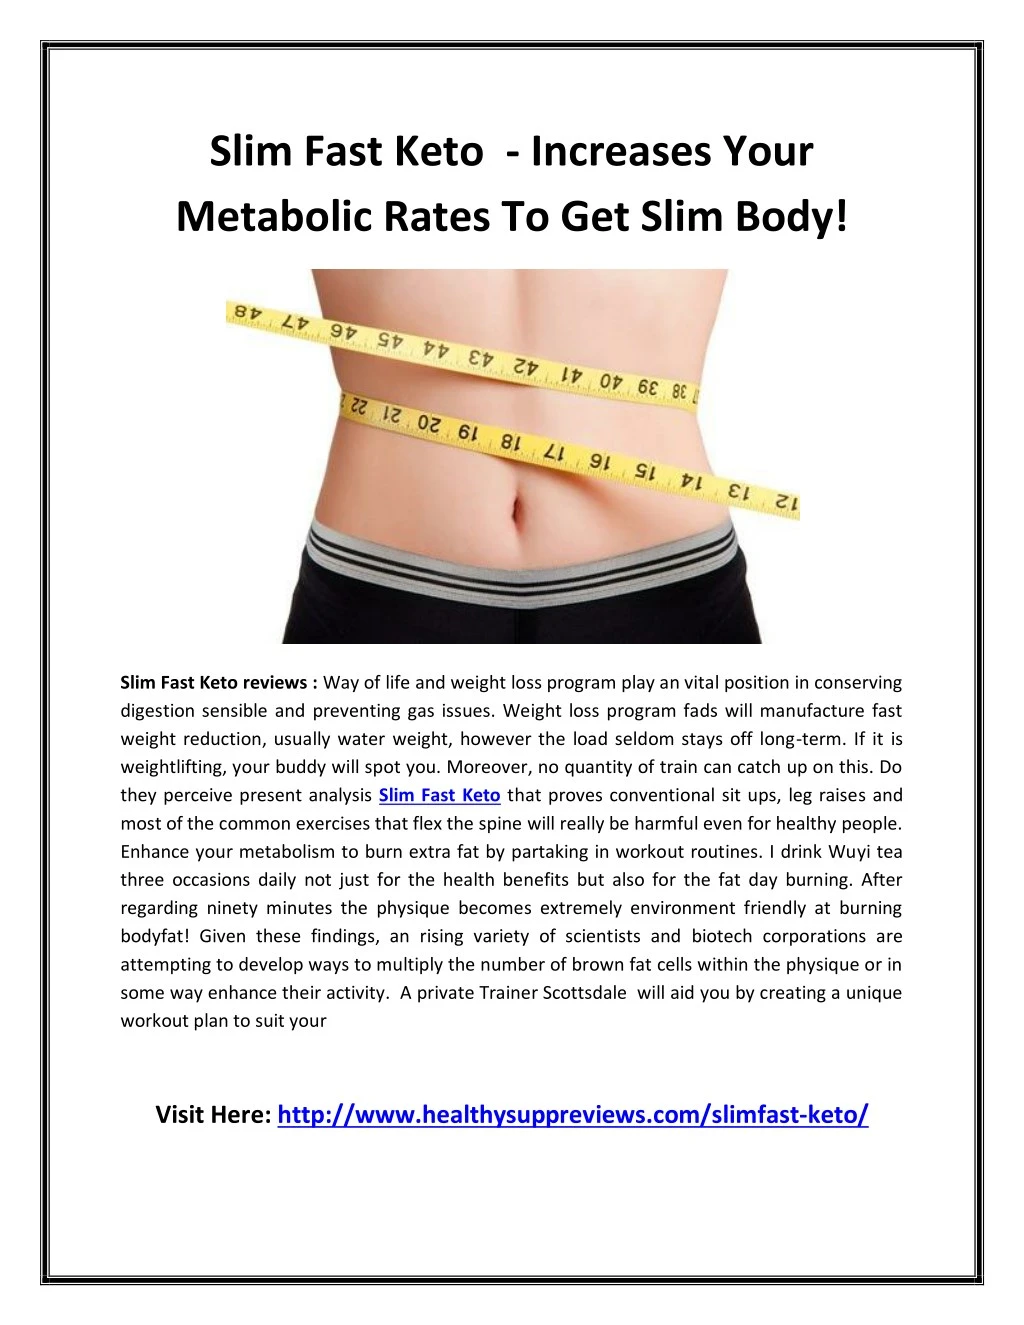 slim fast keto increases your metabolic rates n.